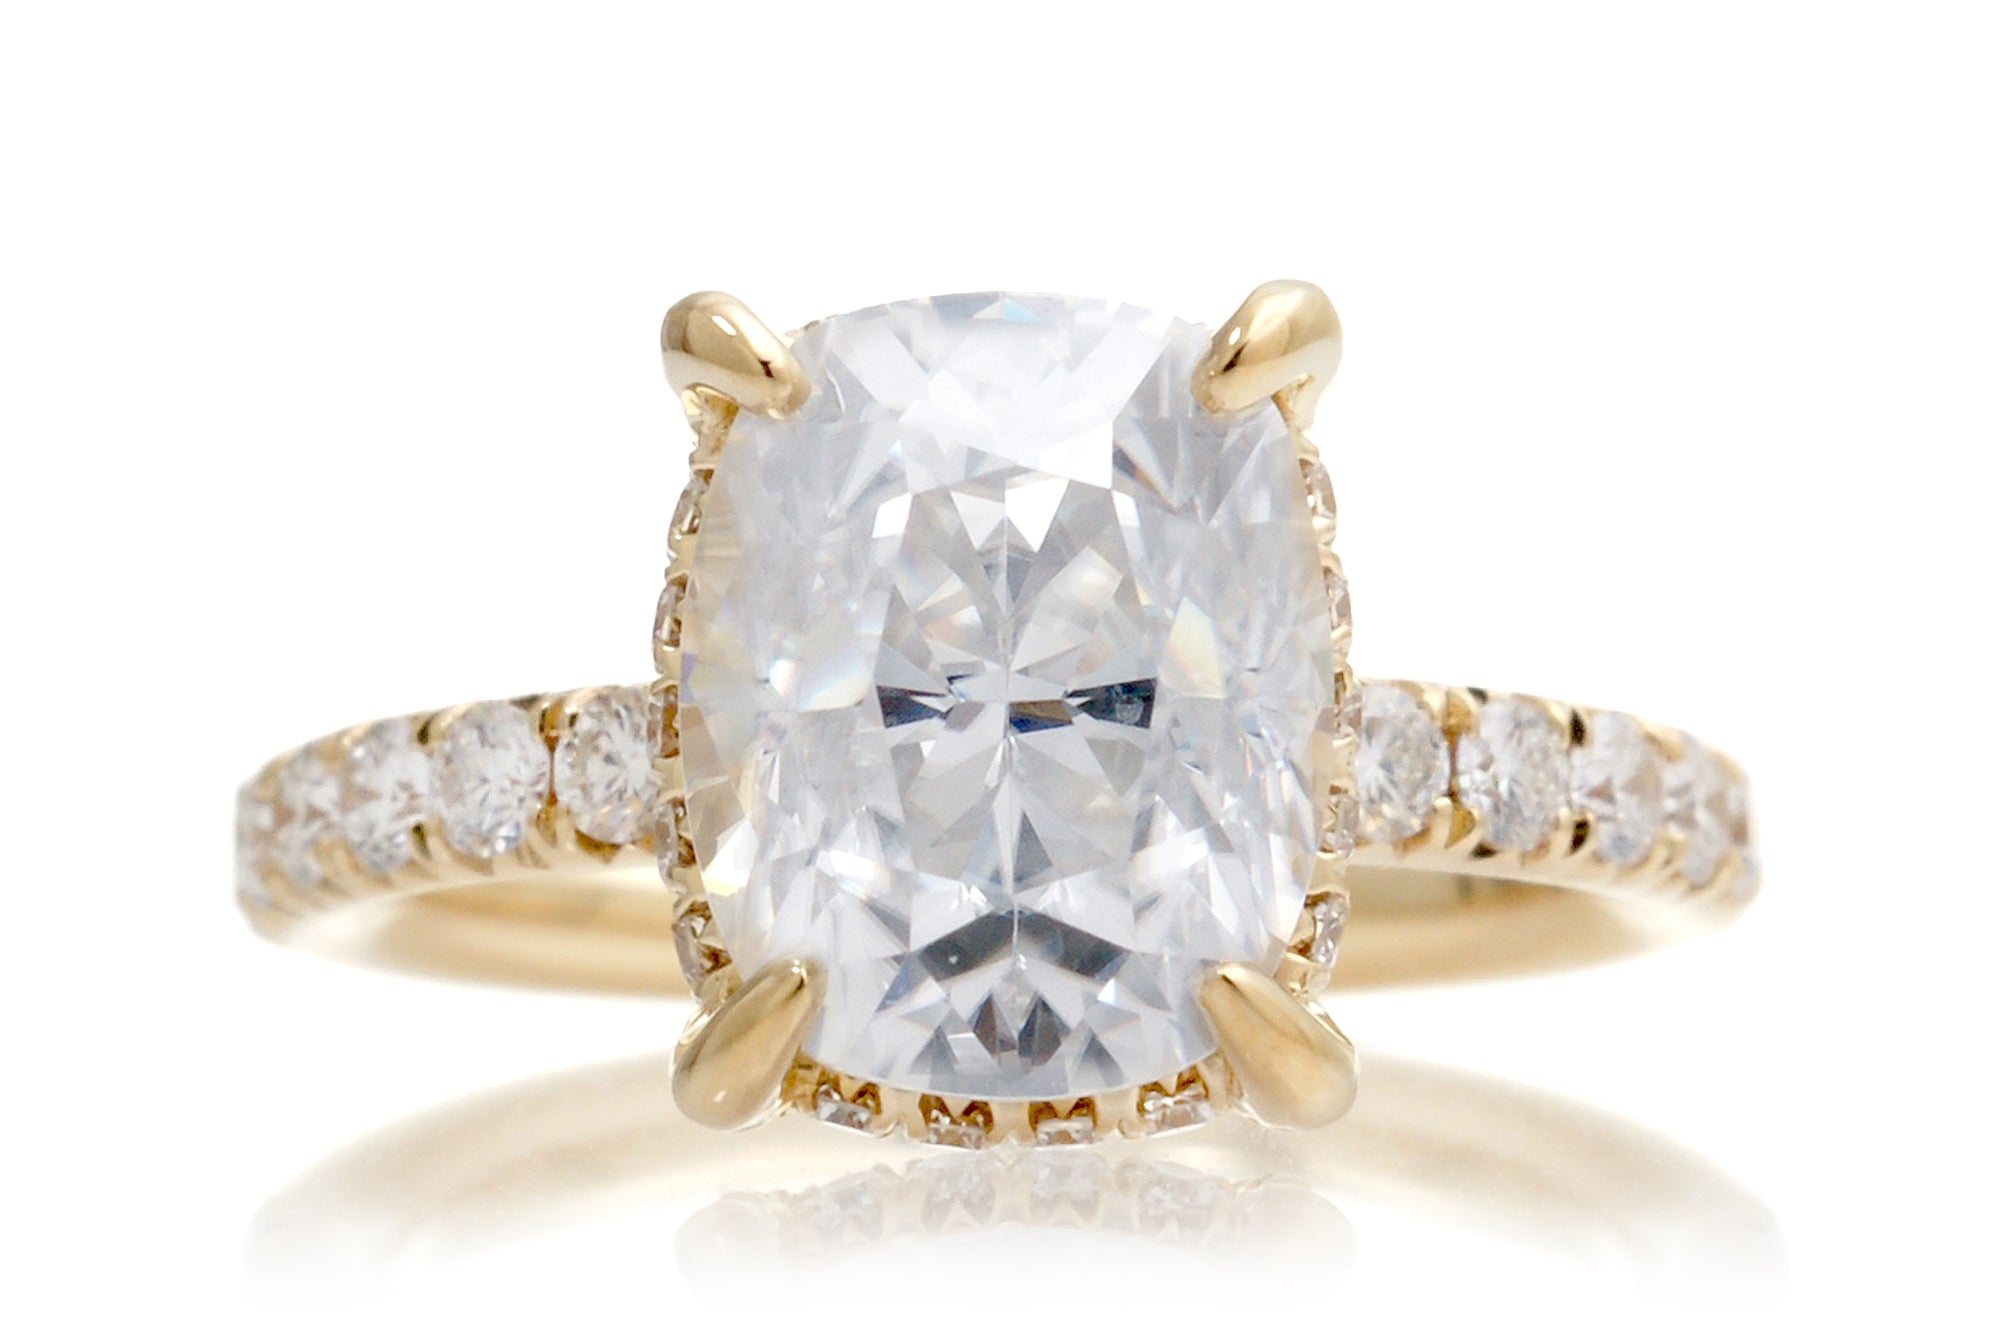 The Drenched Solitaire Cushion Moissanite